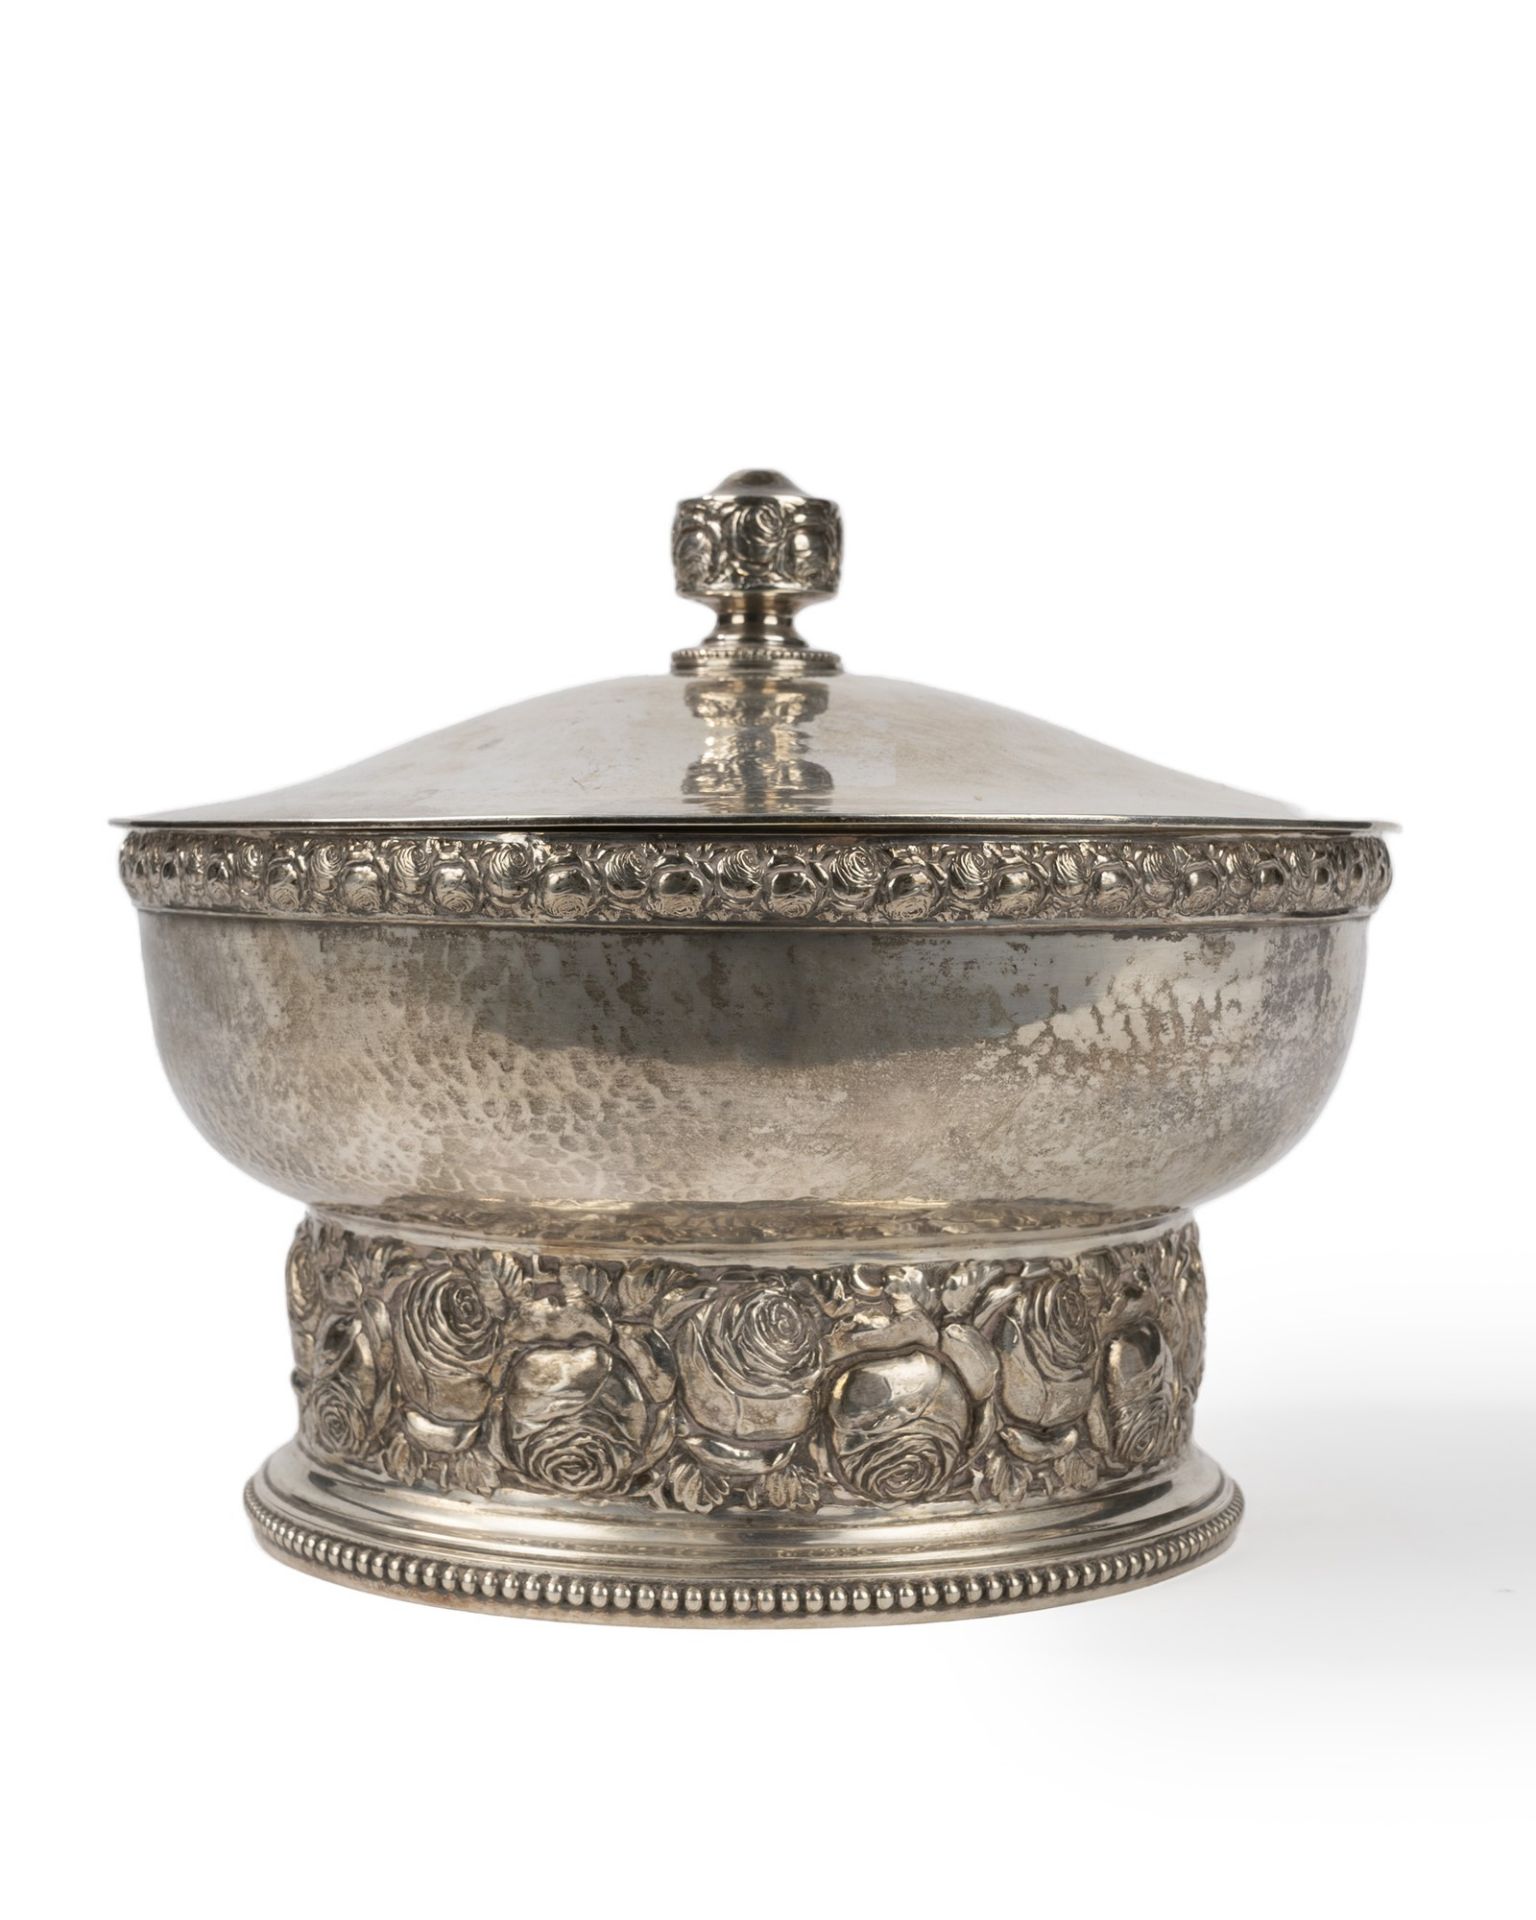 Silver stand with lid decorated with roses and leaves, Germany, early 20th century